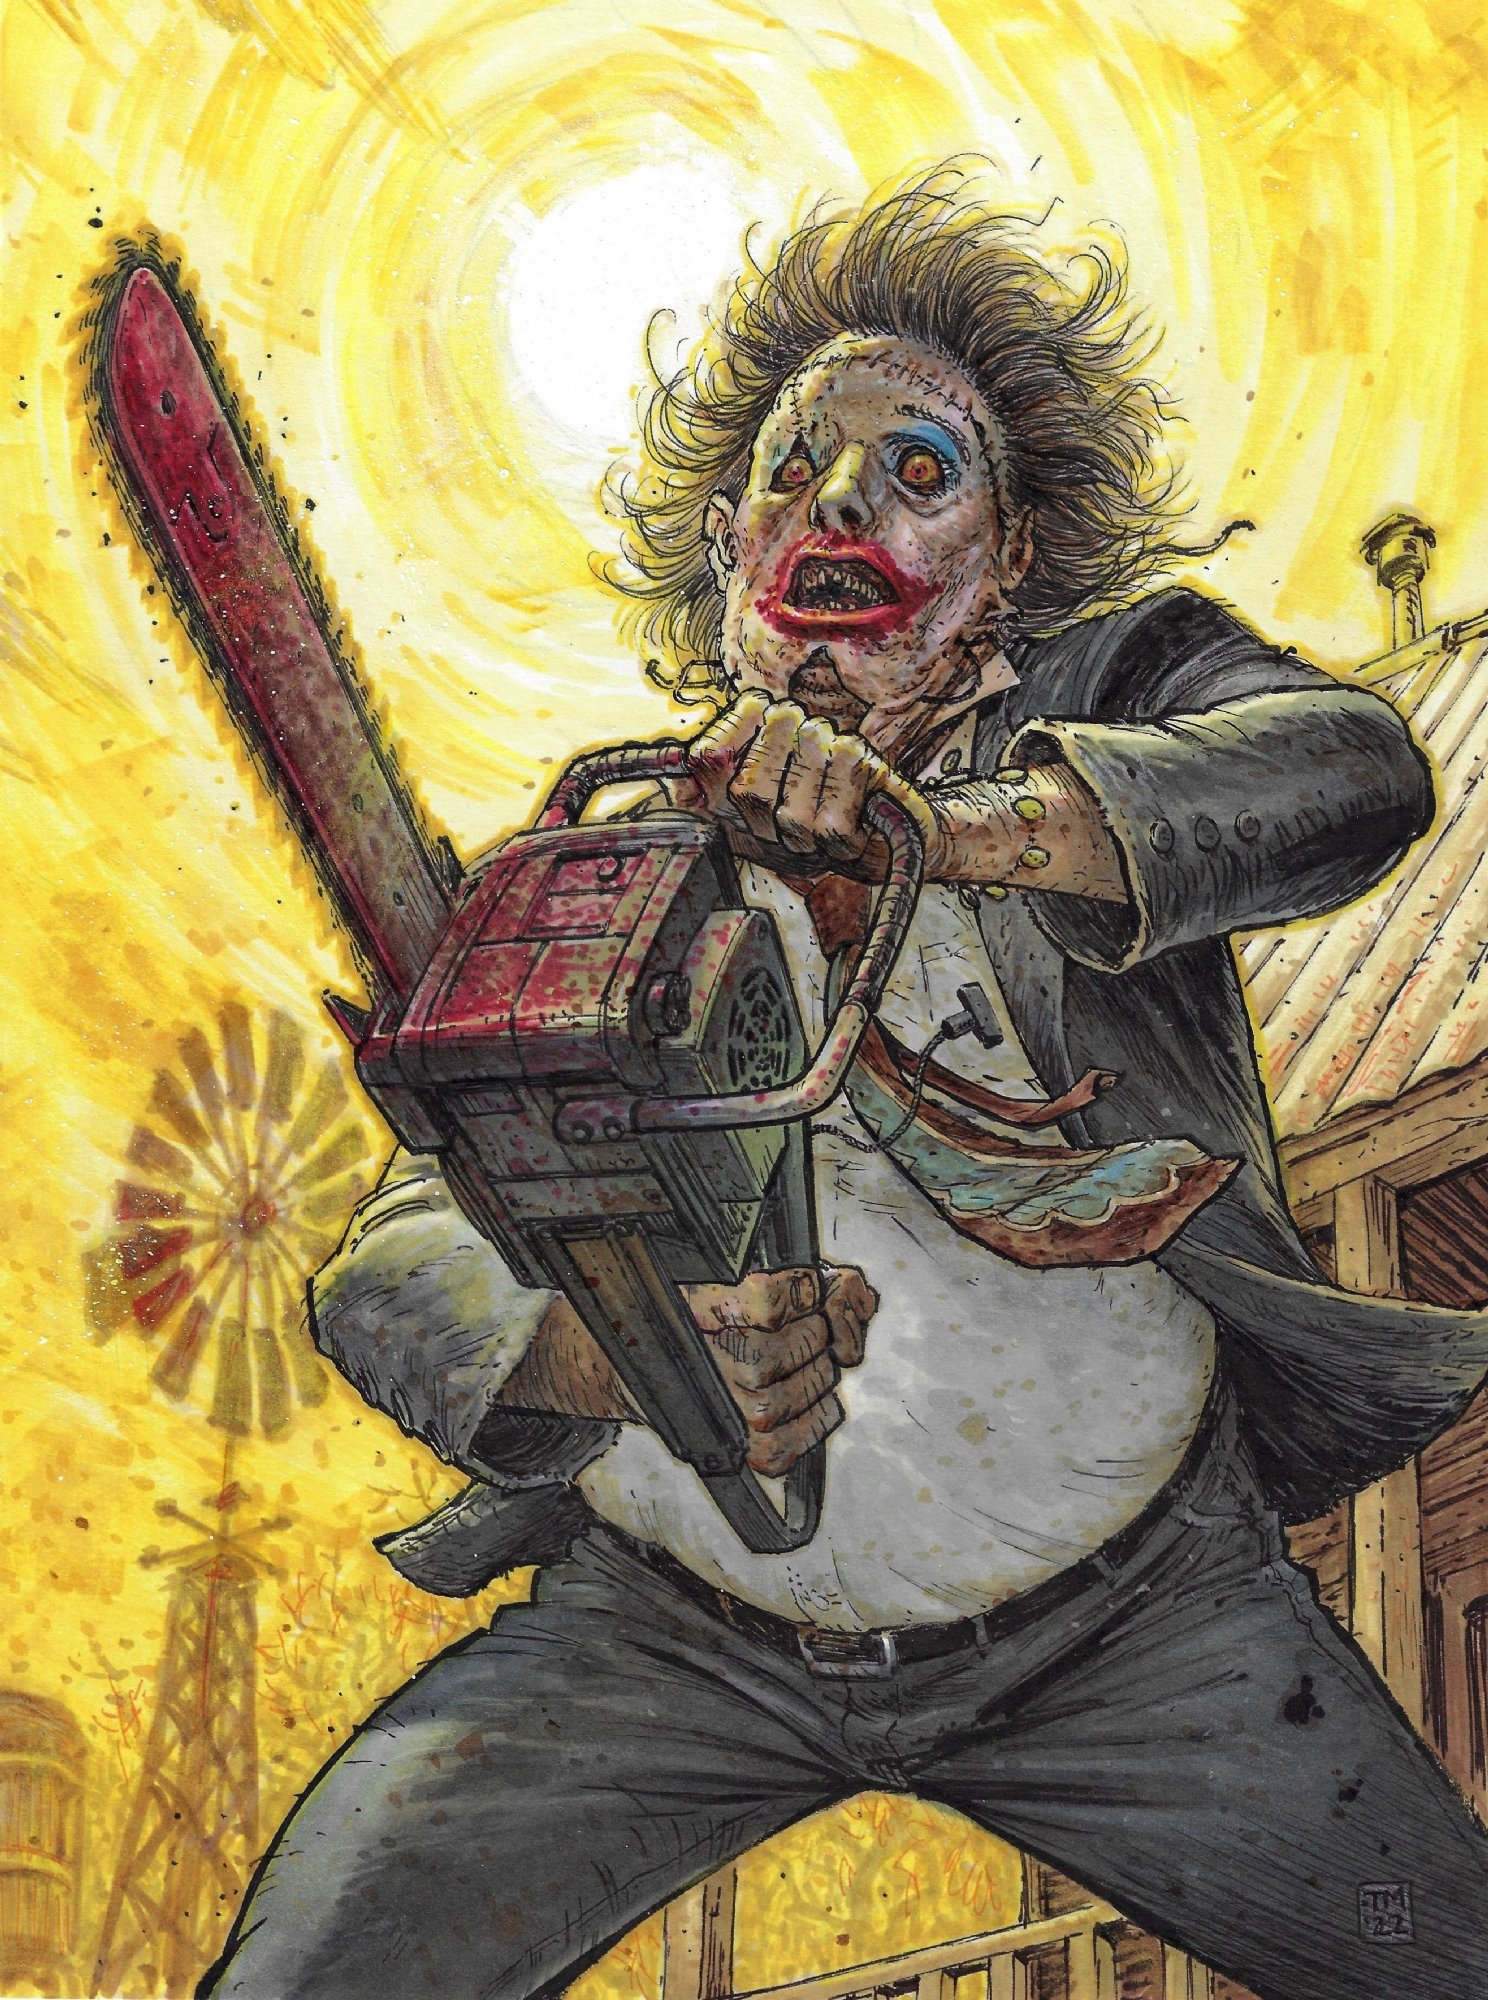 Painted Leatherface